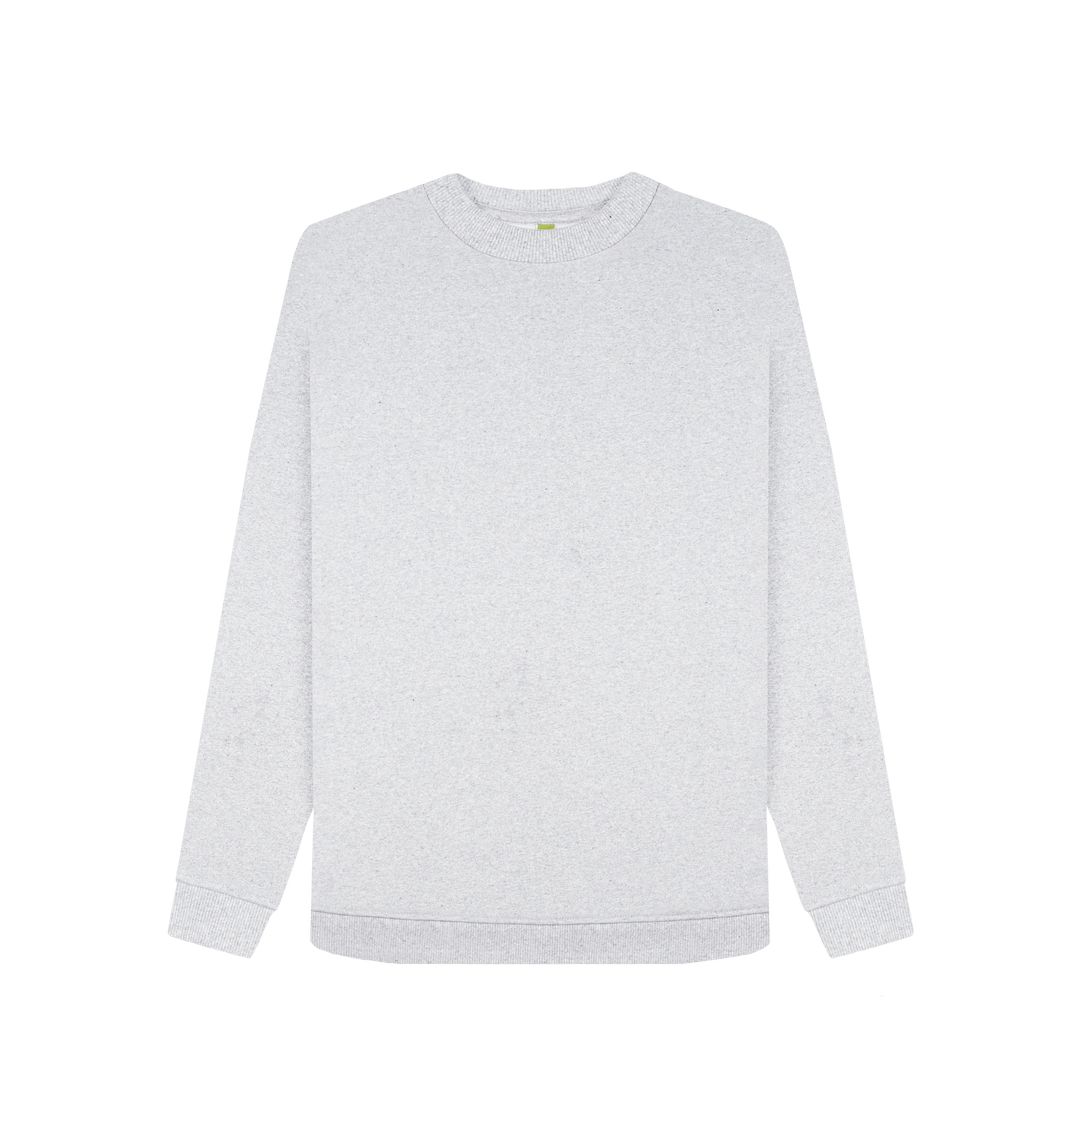 Grey Women's sustainable essential sweater